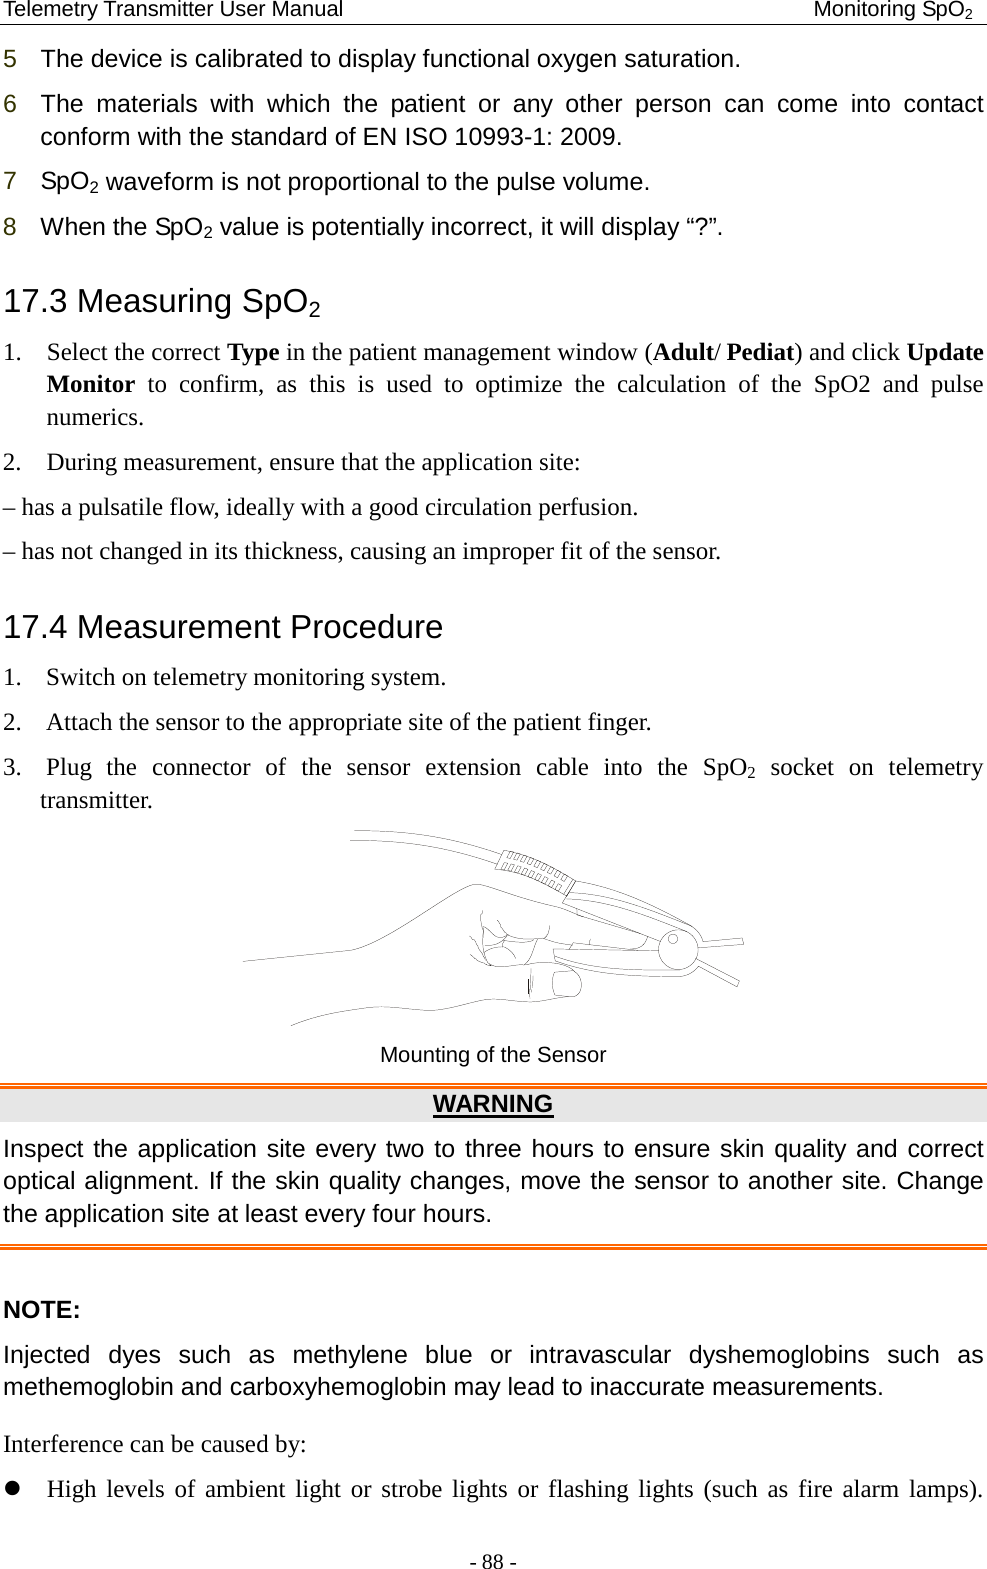 Telemetry Transmitter User Manual                                           Monitoring SpO2 5  The device is calibrated to display functional oxygen saturation. 6  The materials with which the patient or any other person can come into contact conform with the standard of EN ISO 10993-1: 2009. 7  SpO2 waveform is not proportional to the pulse volume. 8  When the SpO2 value is potentially incorrect, it will display “?”. 17.3 Measuring SpO2 1. Select the correct Type in the patient management window (Adult/ Pediat) and click Update Monitor to confirm, as this is used to optimize the calculation of the SpO2 and pulse numerics. 2. During measurement, ensure that the application site: – has a pulsatile flow, ideally with a good circulation perfusion. – has not changed in its thickness, causing an improper fit of the sensor. 17.4 Measurement Procedure 1. Switch on telemetry monitoring system. 2. Attach the sensor to the appropriate site of the patient finger.   3. Plug the connector of the sensor extension cable into the SpO2 socket on telemetry transmitter.  Mounting of the Sensor WARNING Inspect the application site every two to three hours to ensure skin quality and correct optical alignment. If the skin quality changes, move the sensor to another site. Change the application site at least every four hours.  NOTE: Injected dyes such as methylene blue or intravascular dyshemoglobins such as methemoglobin and carboxyhemoglobin may lead to inaccurate measurements. Interference can be caused by:  High levels of ambient light or strobe lights or flashing lights (such as fire alarm lamps). - 88 - 